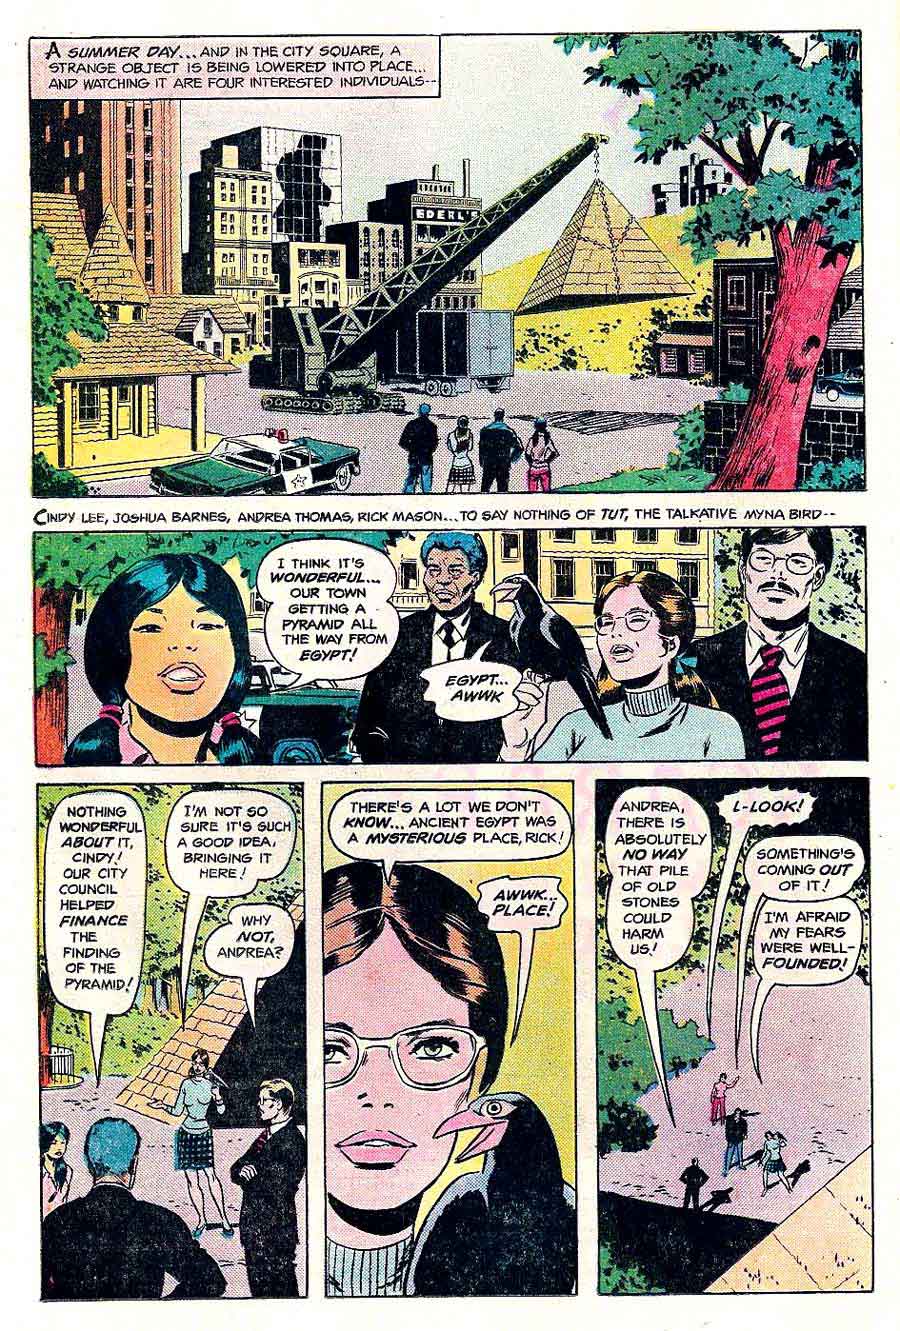 Isis v1 #1 dc bronze age comic book page art by Wally Wood art